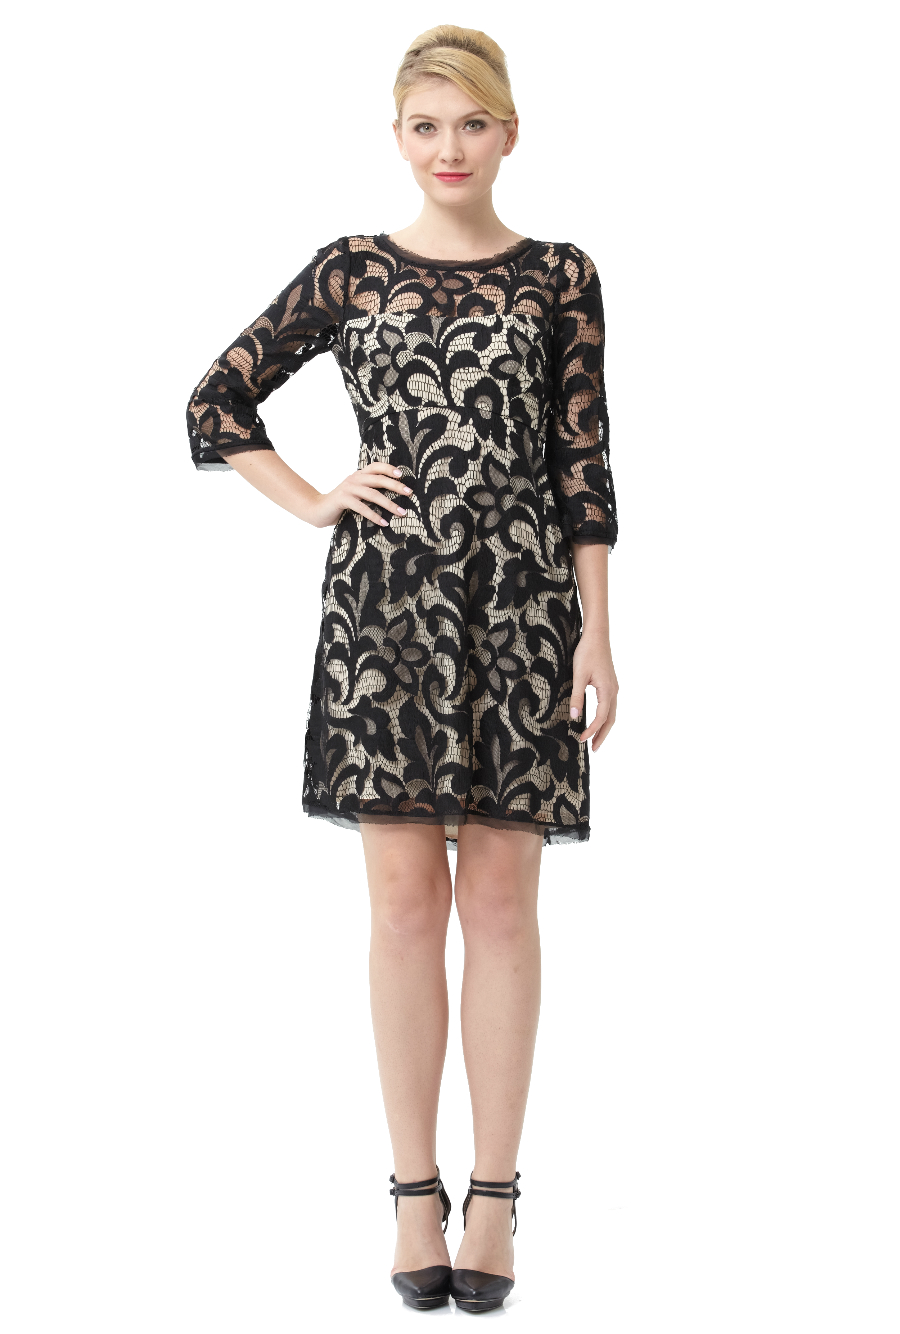 ABS by Allen Schwartz Black And Nude Stretch Lace 3/4 Sleeve Dress